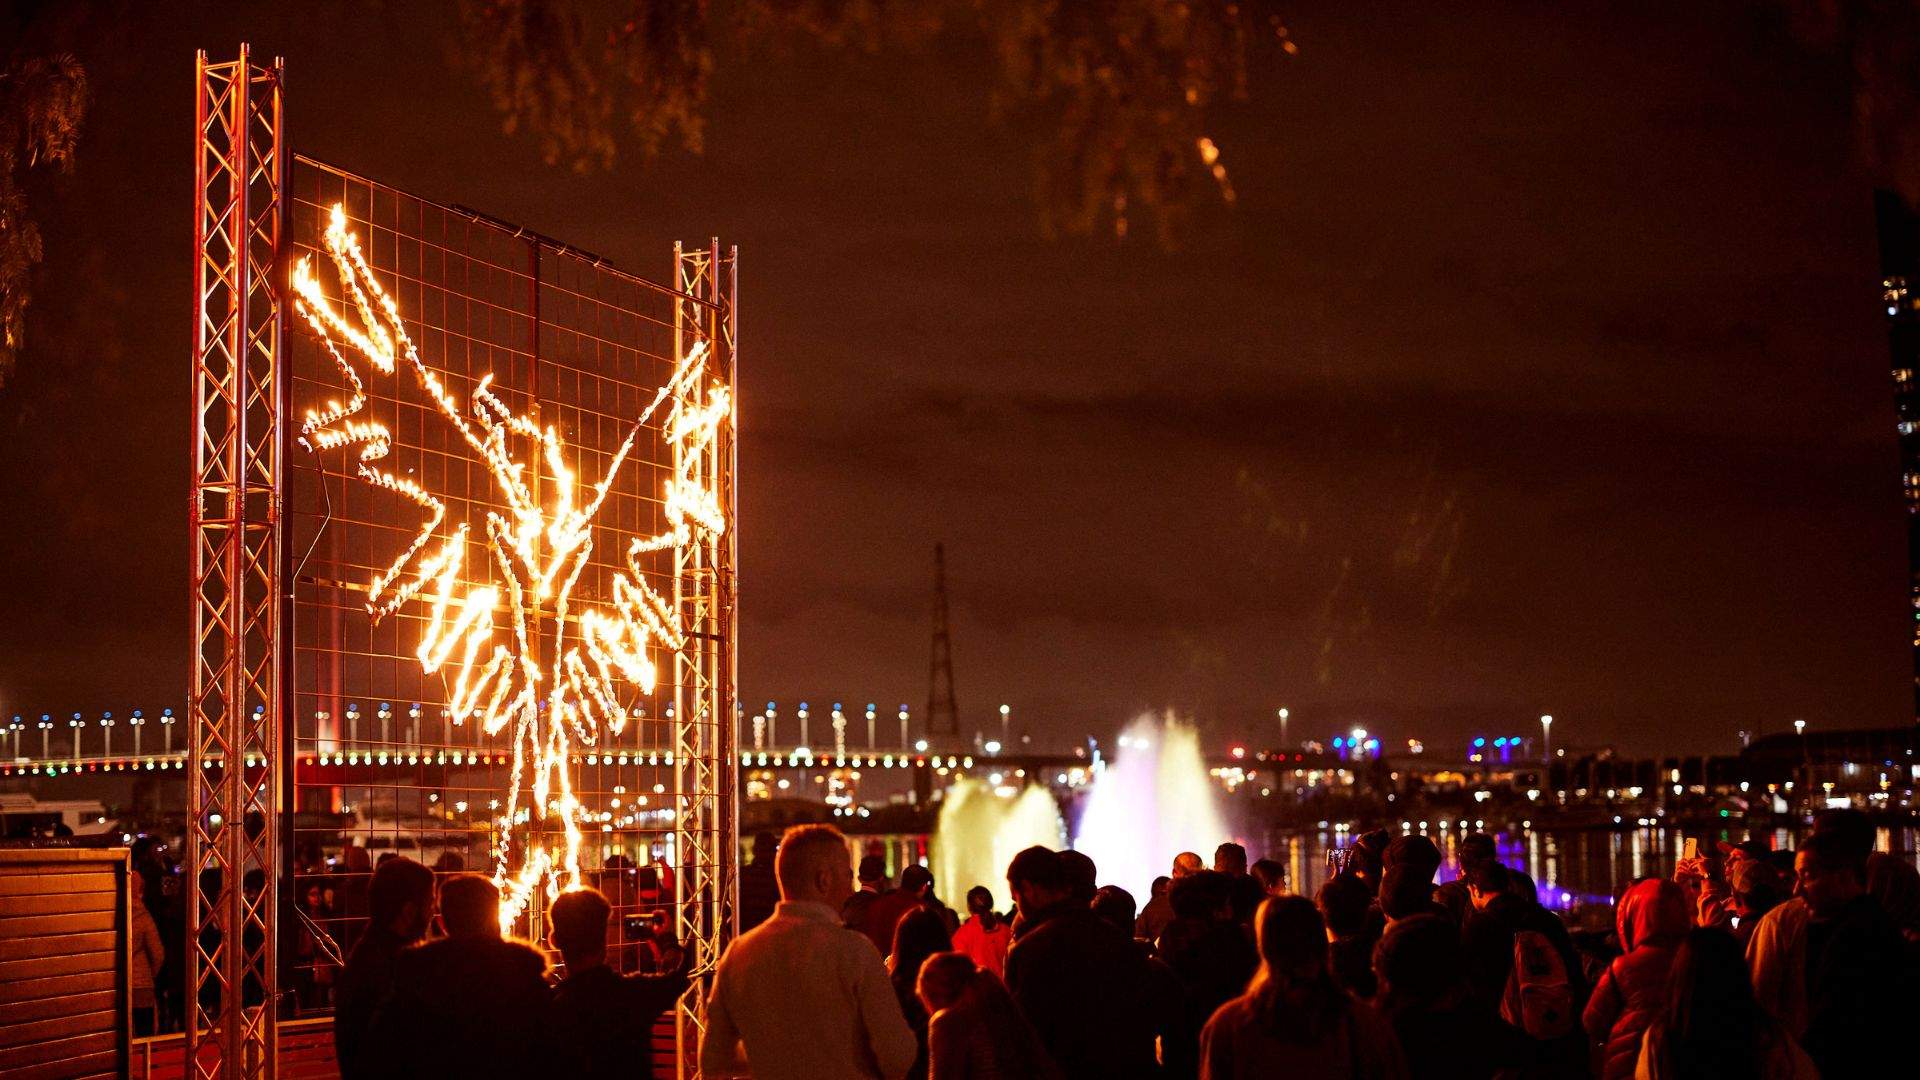 Docklands' After-Dark Arts Festival Firelight Will Return for Three Fire-Filled Nights This Winter